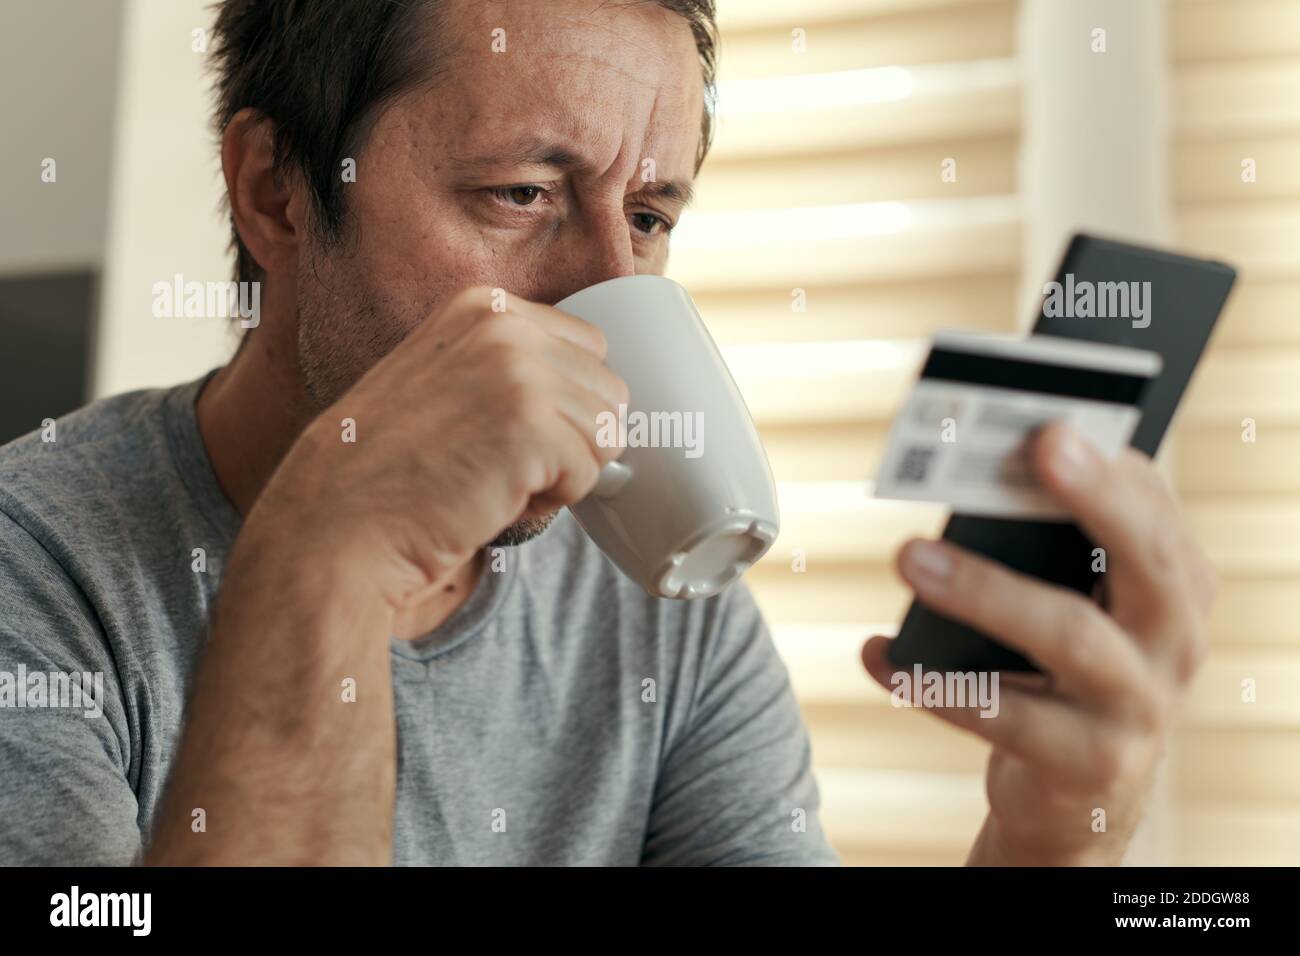 Man shopping online from home with mobile phone and credit card, adult male drinking coffee and buying on internet from his living room Stock Photo